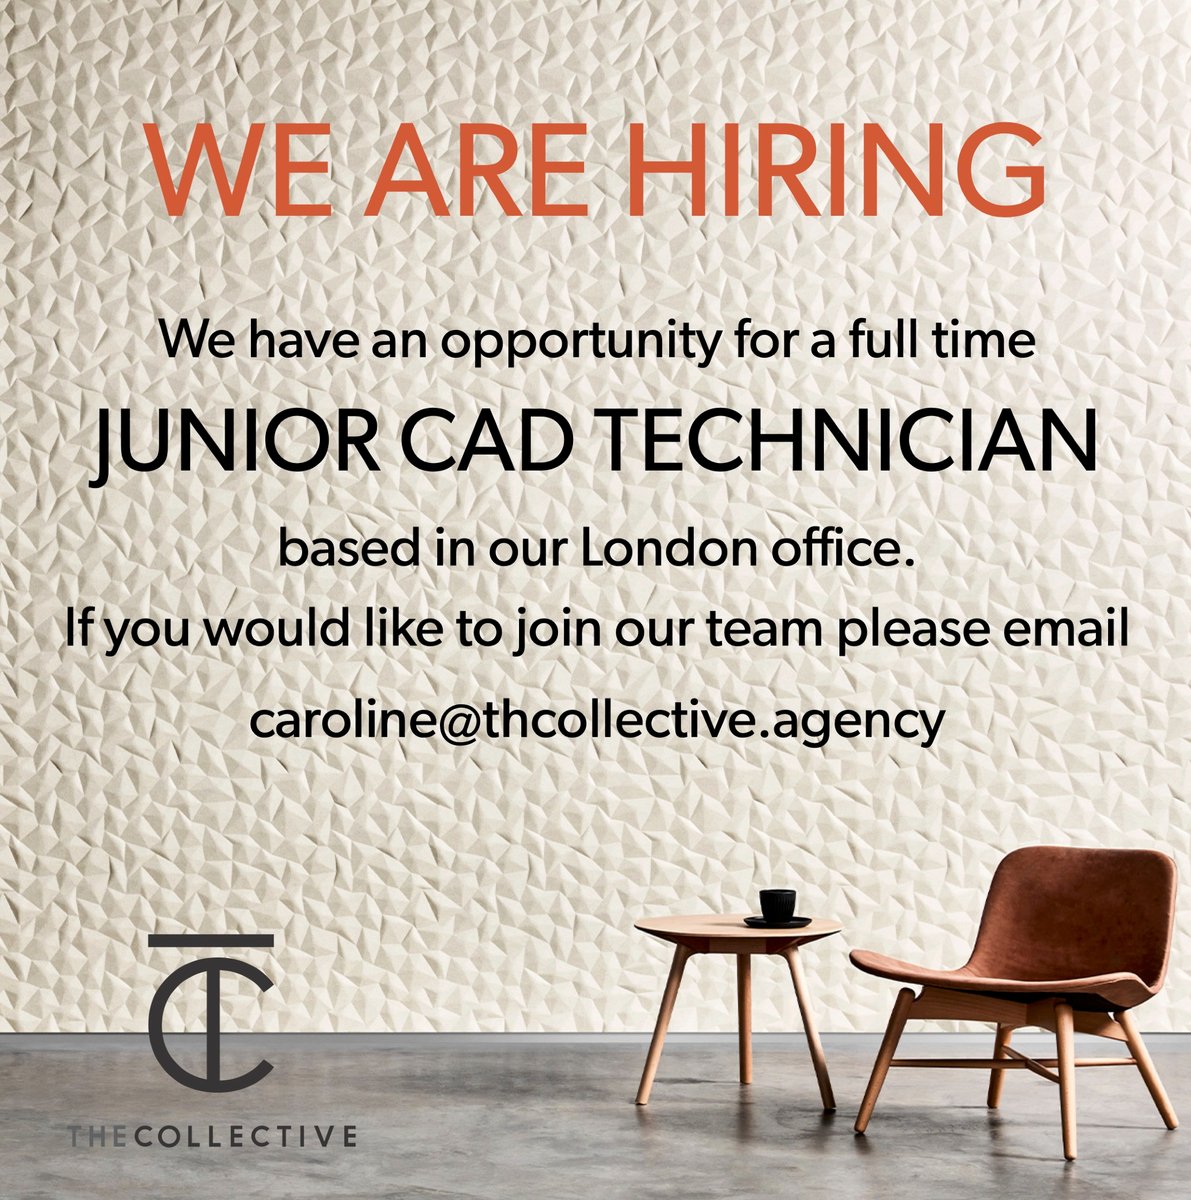 WE ARE HIRING! 
Are you our next superstar? Would you like to be part of our team and work on some really exciting projects? 
Please contact caroline@thecollective.agency if you would like to know more. 

#recruiting #hiring #jobs #cadtechnician #commercialinteriors